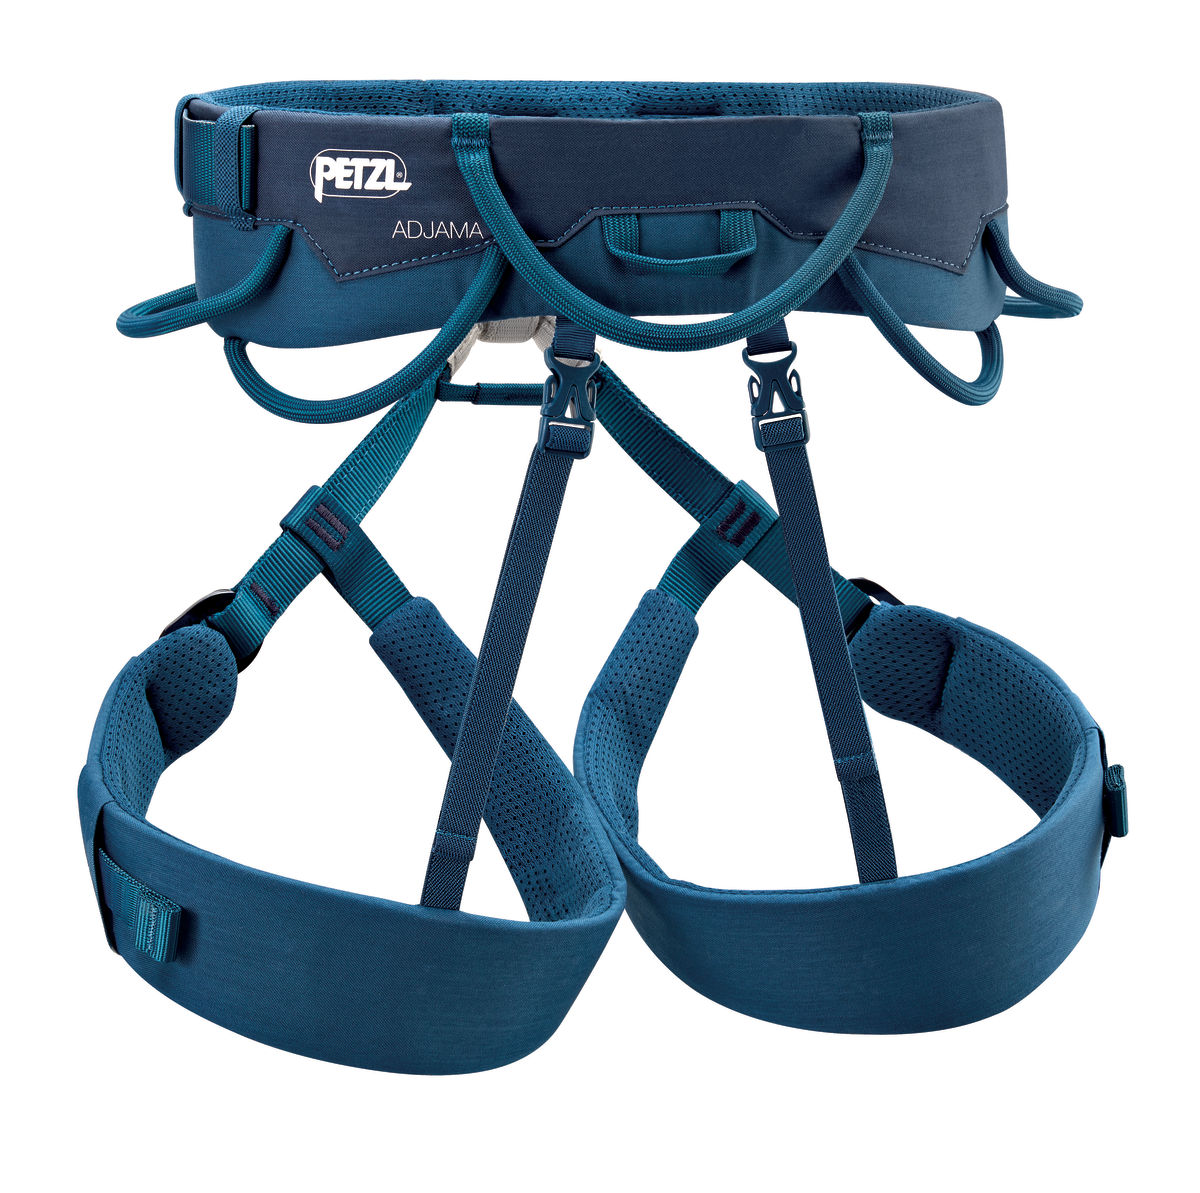 ADJAMA, Climbing and mountaineering harness with adjustable leg loops, for  single and multi-pitch climbing - Petzl USA